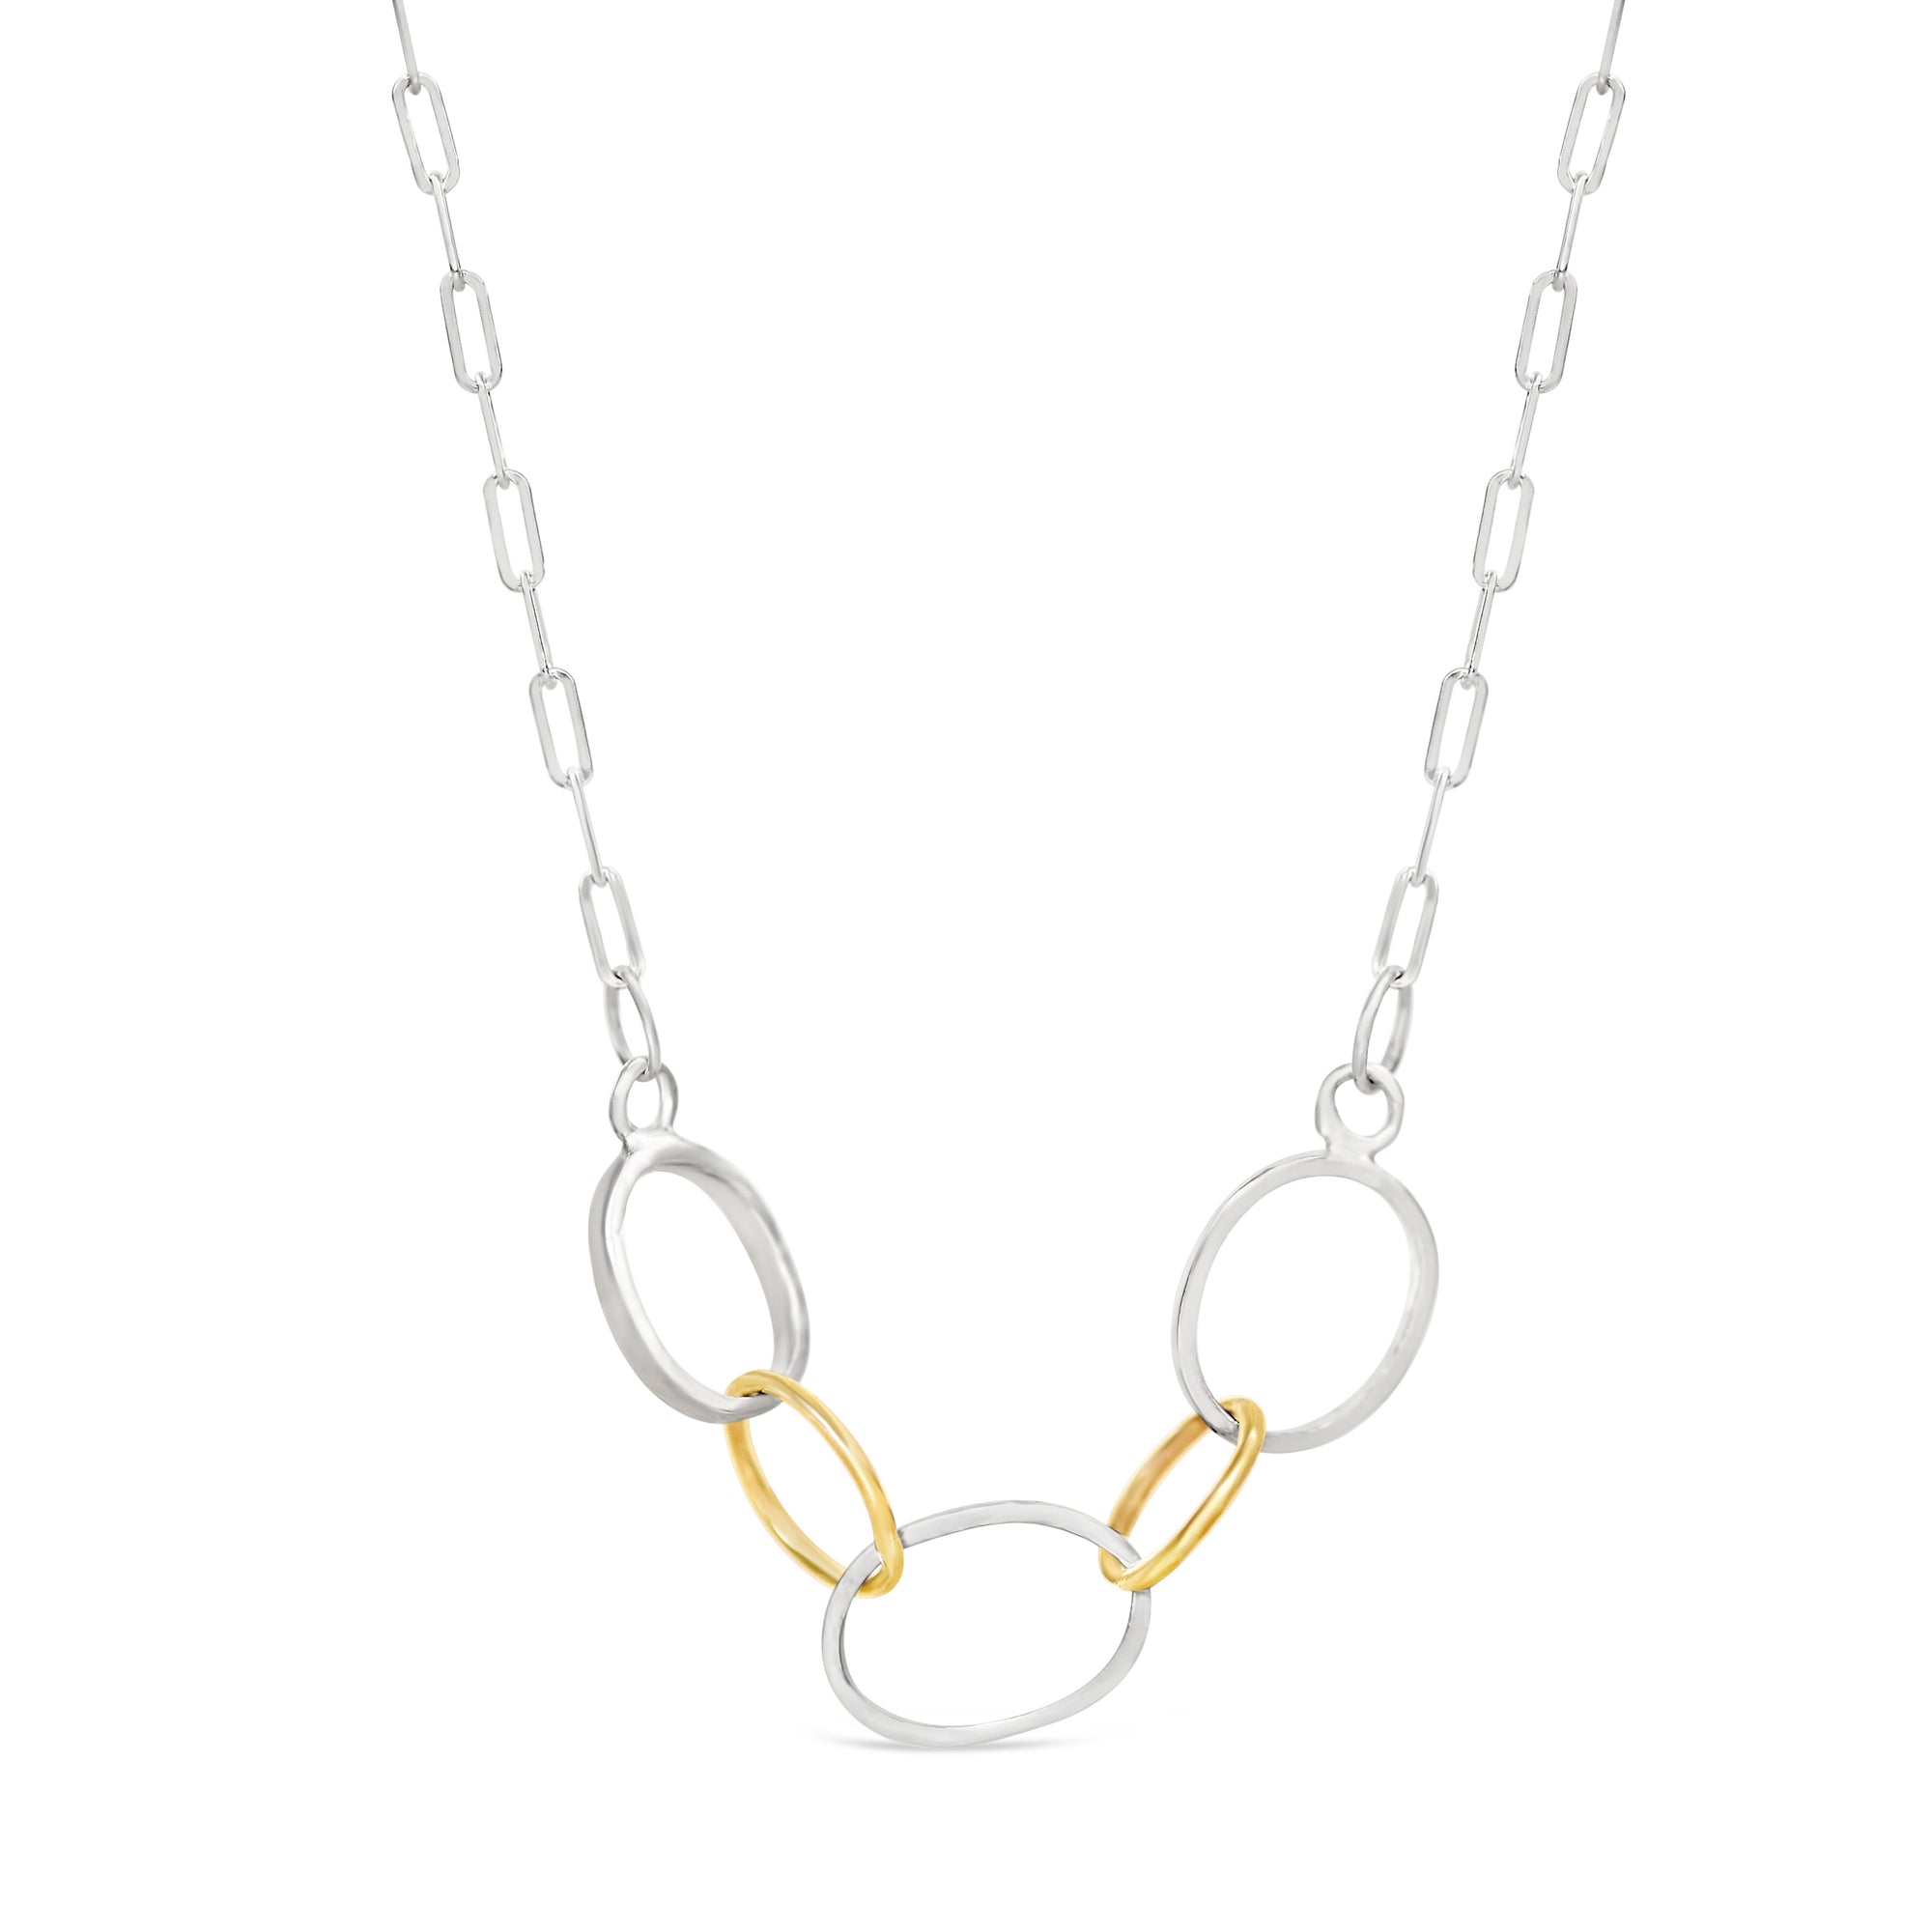 Jules-14KY & Sterling Silver Interlocking Rings Necklace